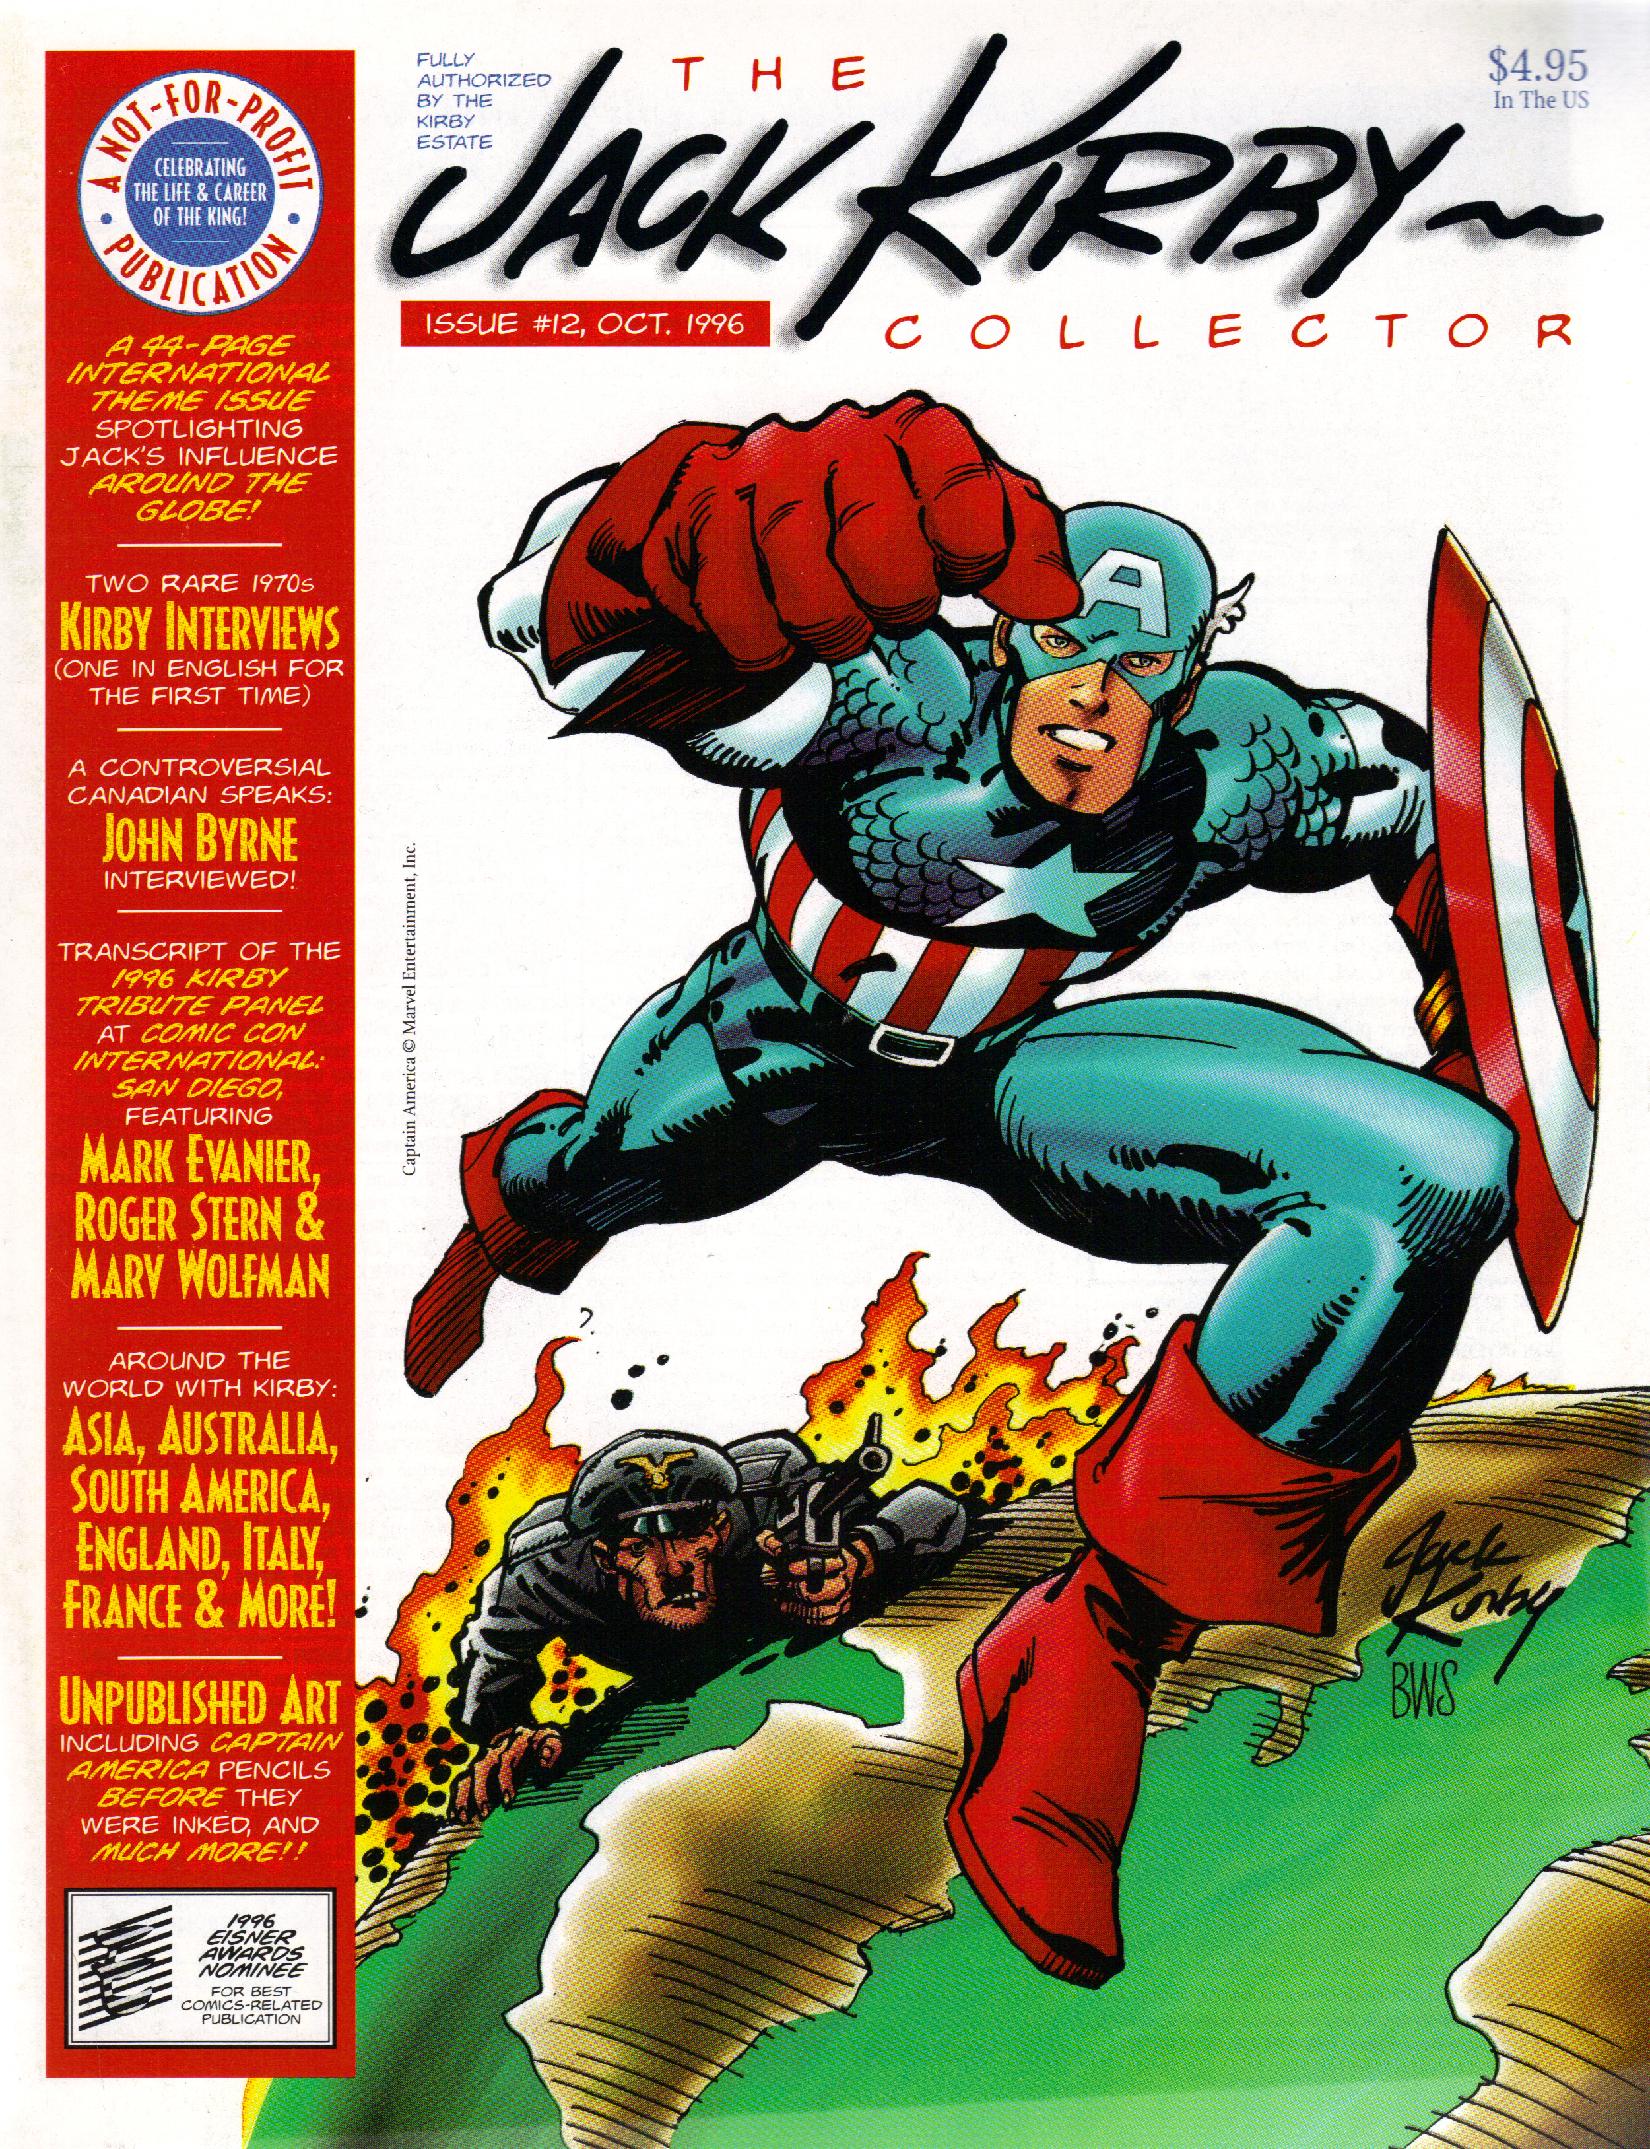 Read online The Jack Kirby Collector comic -  Issue #12 - 1